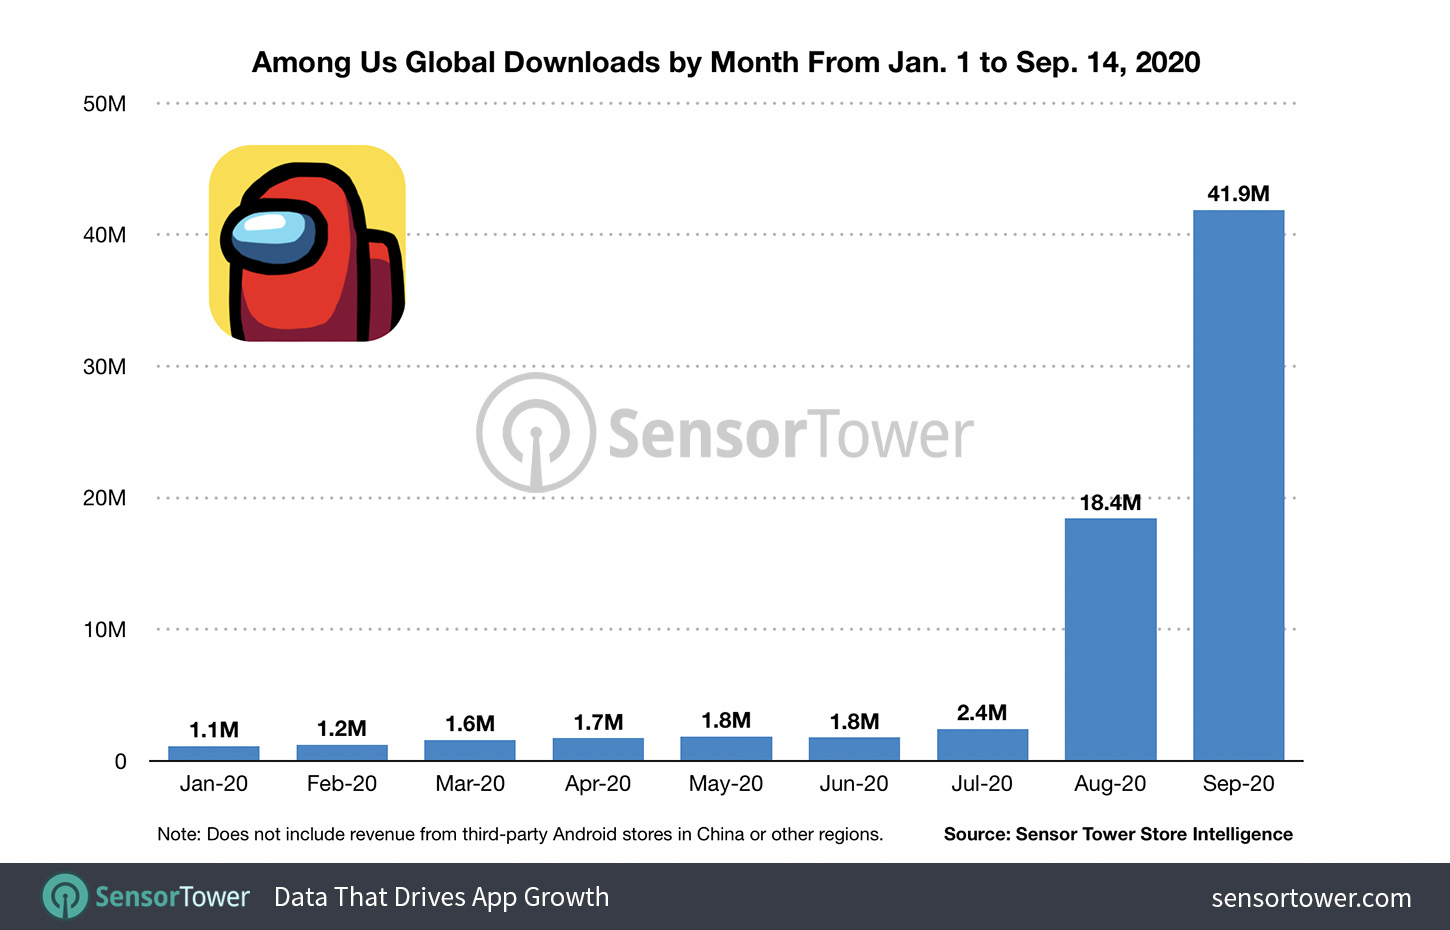 Among Us Global Downloads by Month From Jan. 1 to Sep. 14, 2020